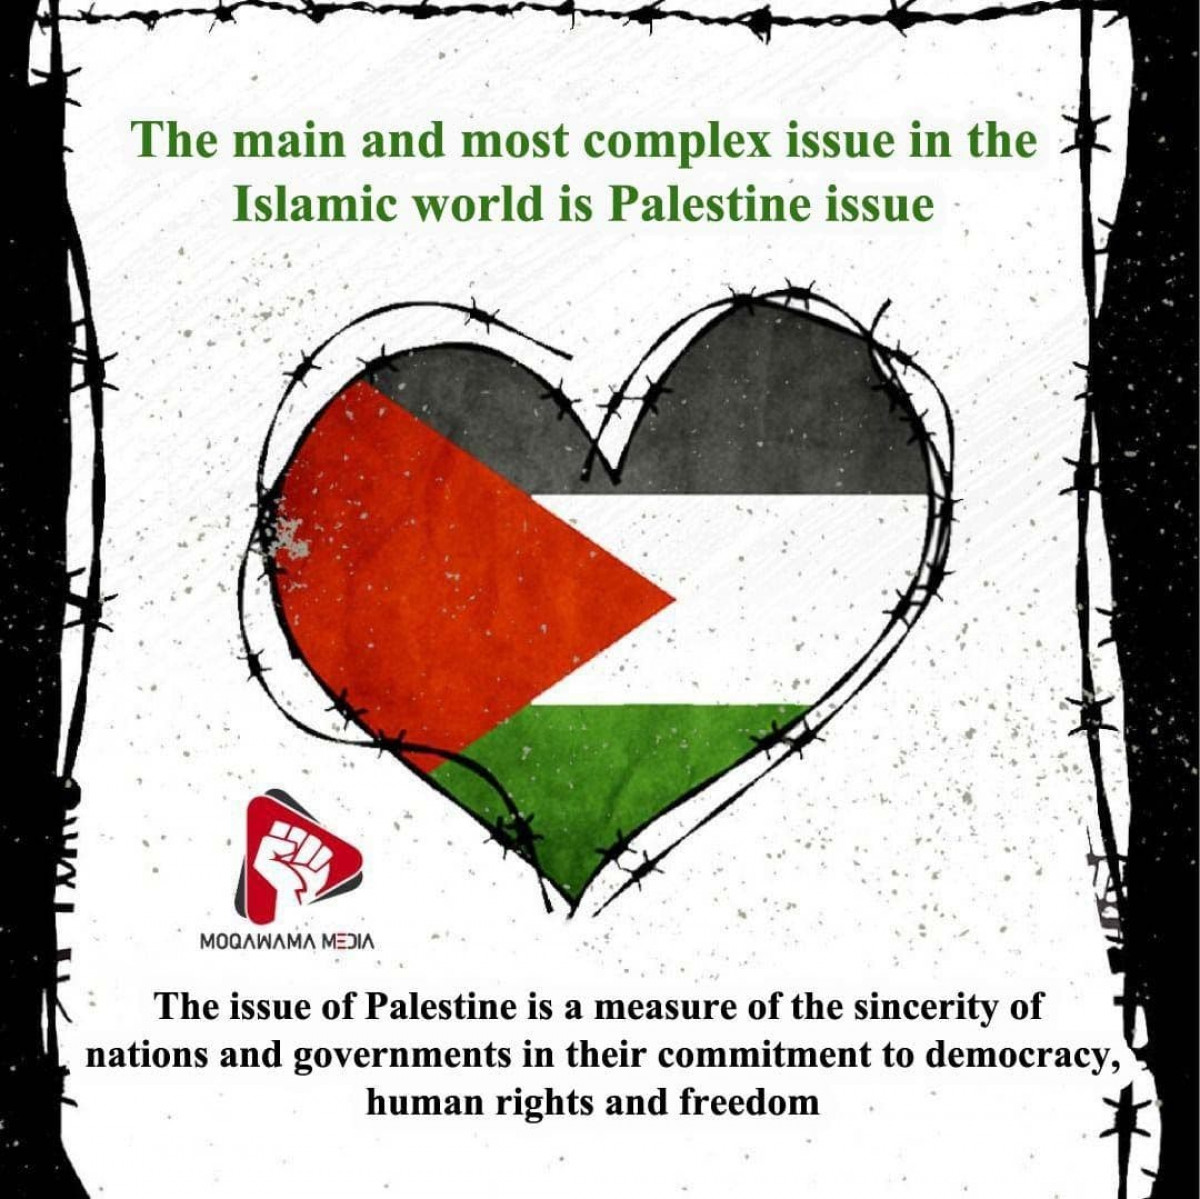 The main and most complex issue in the Islamic world is Palestine issue